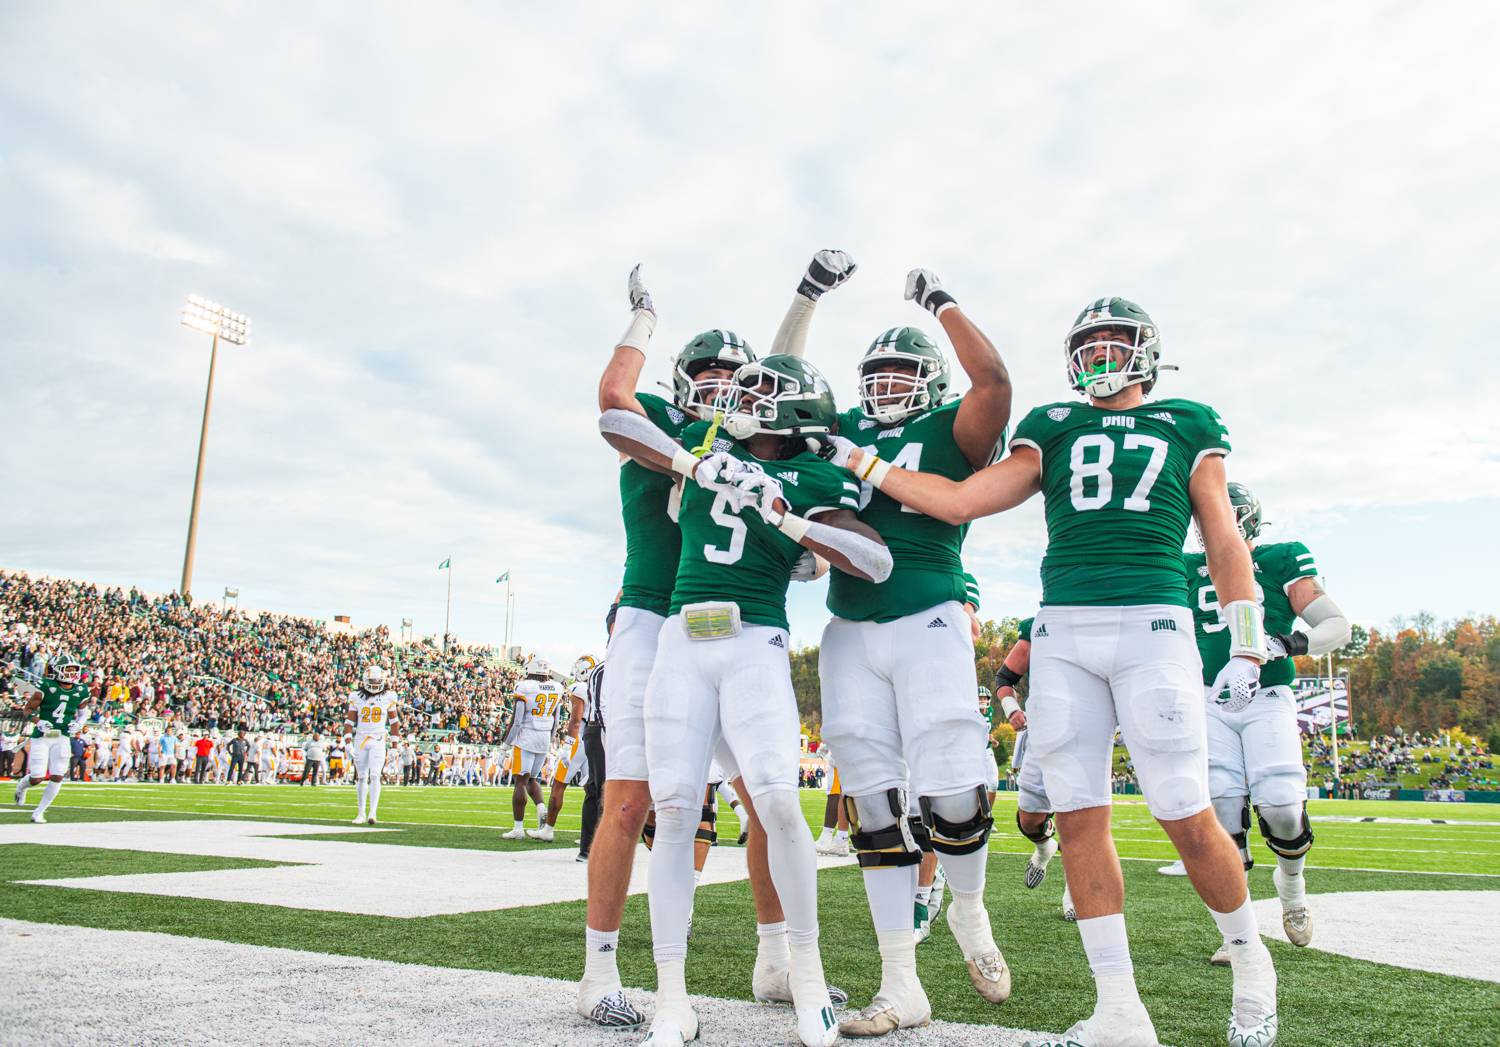 OHIO Football players celebrate at this year’s Homecoming Game.